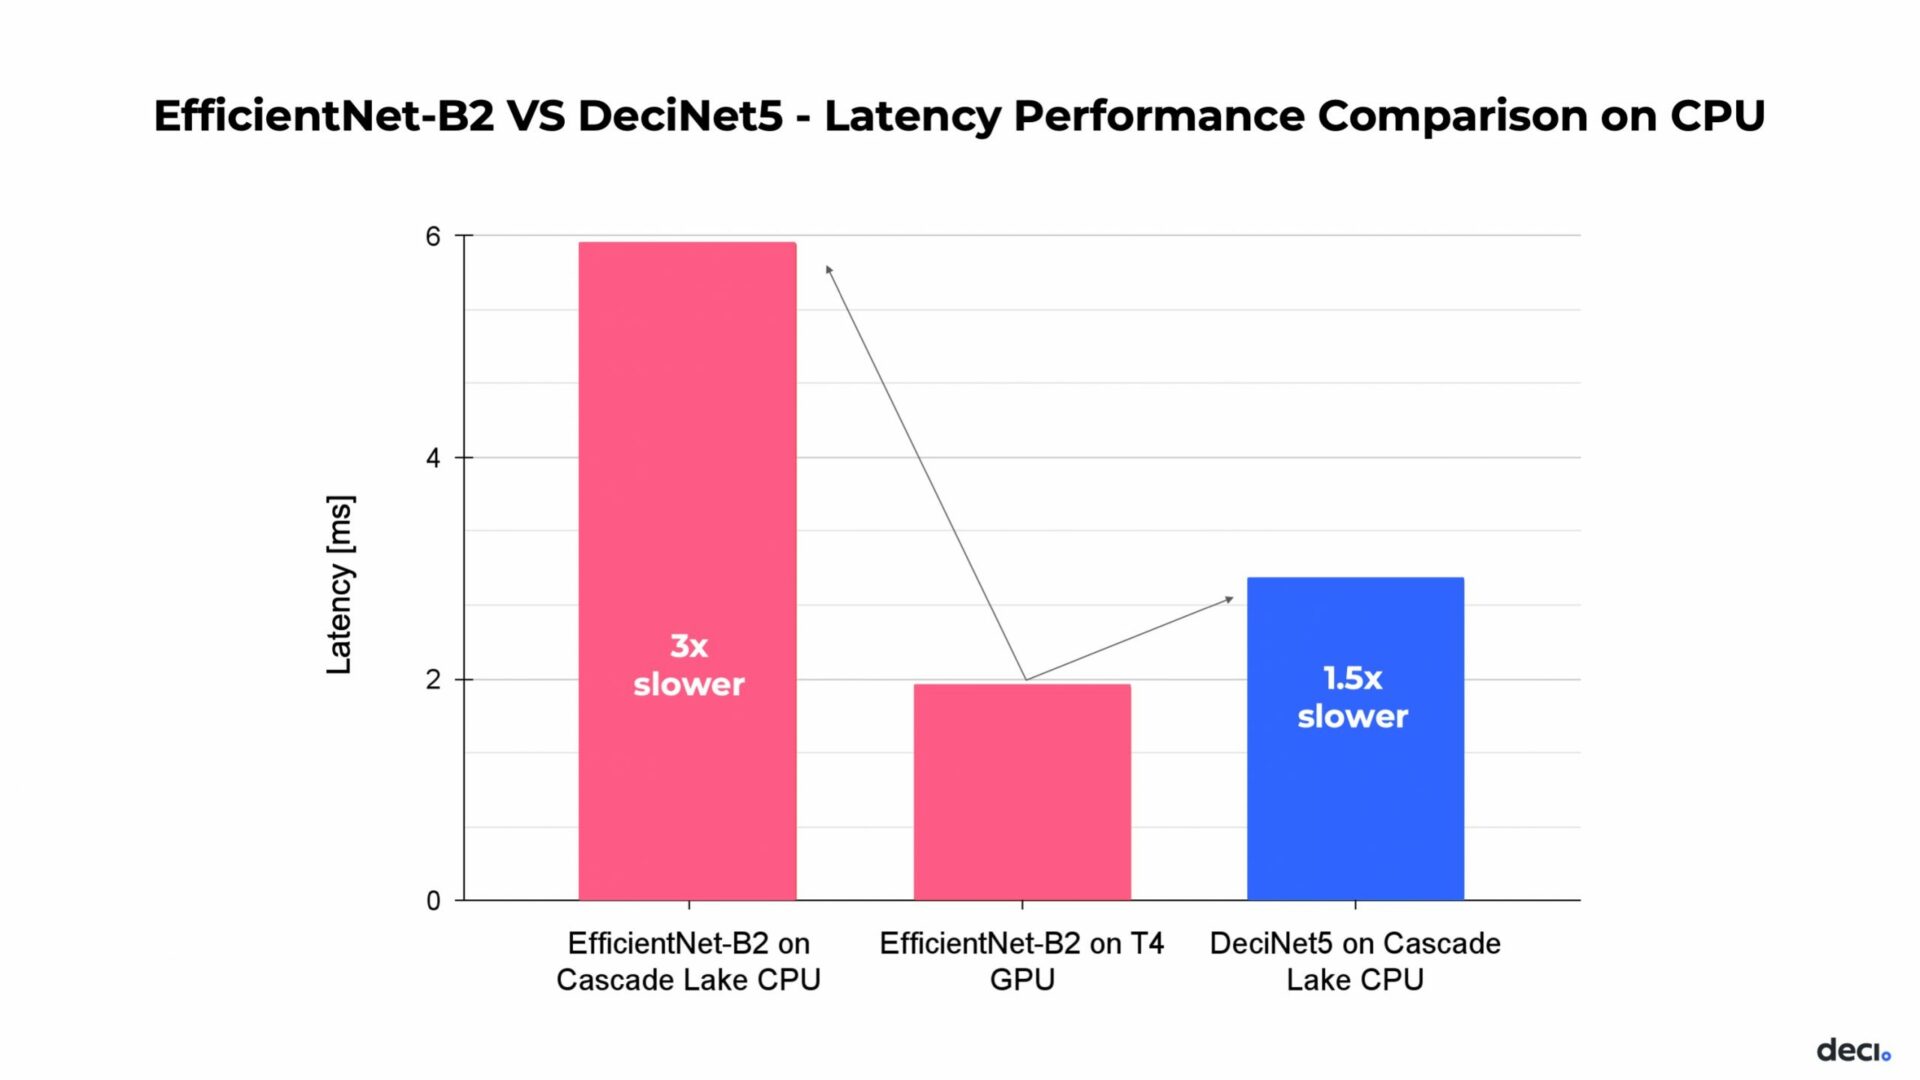 GPU vs CPU Performance Comparison: A graph showing the performance of EfficientNet-B2 on CPU and GPU vs DeciNets performance on CPU